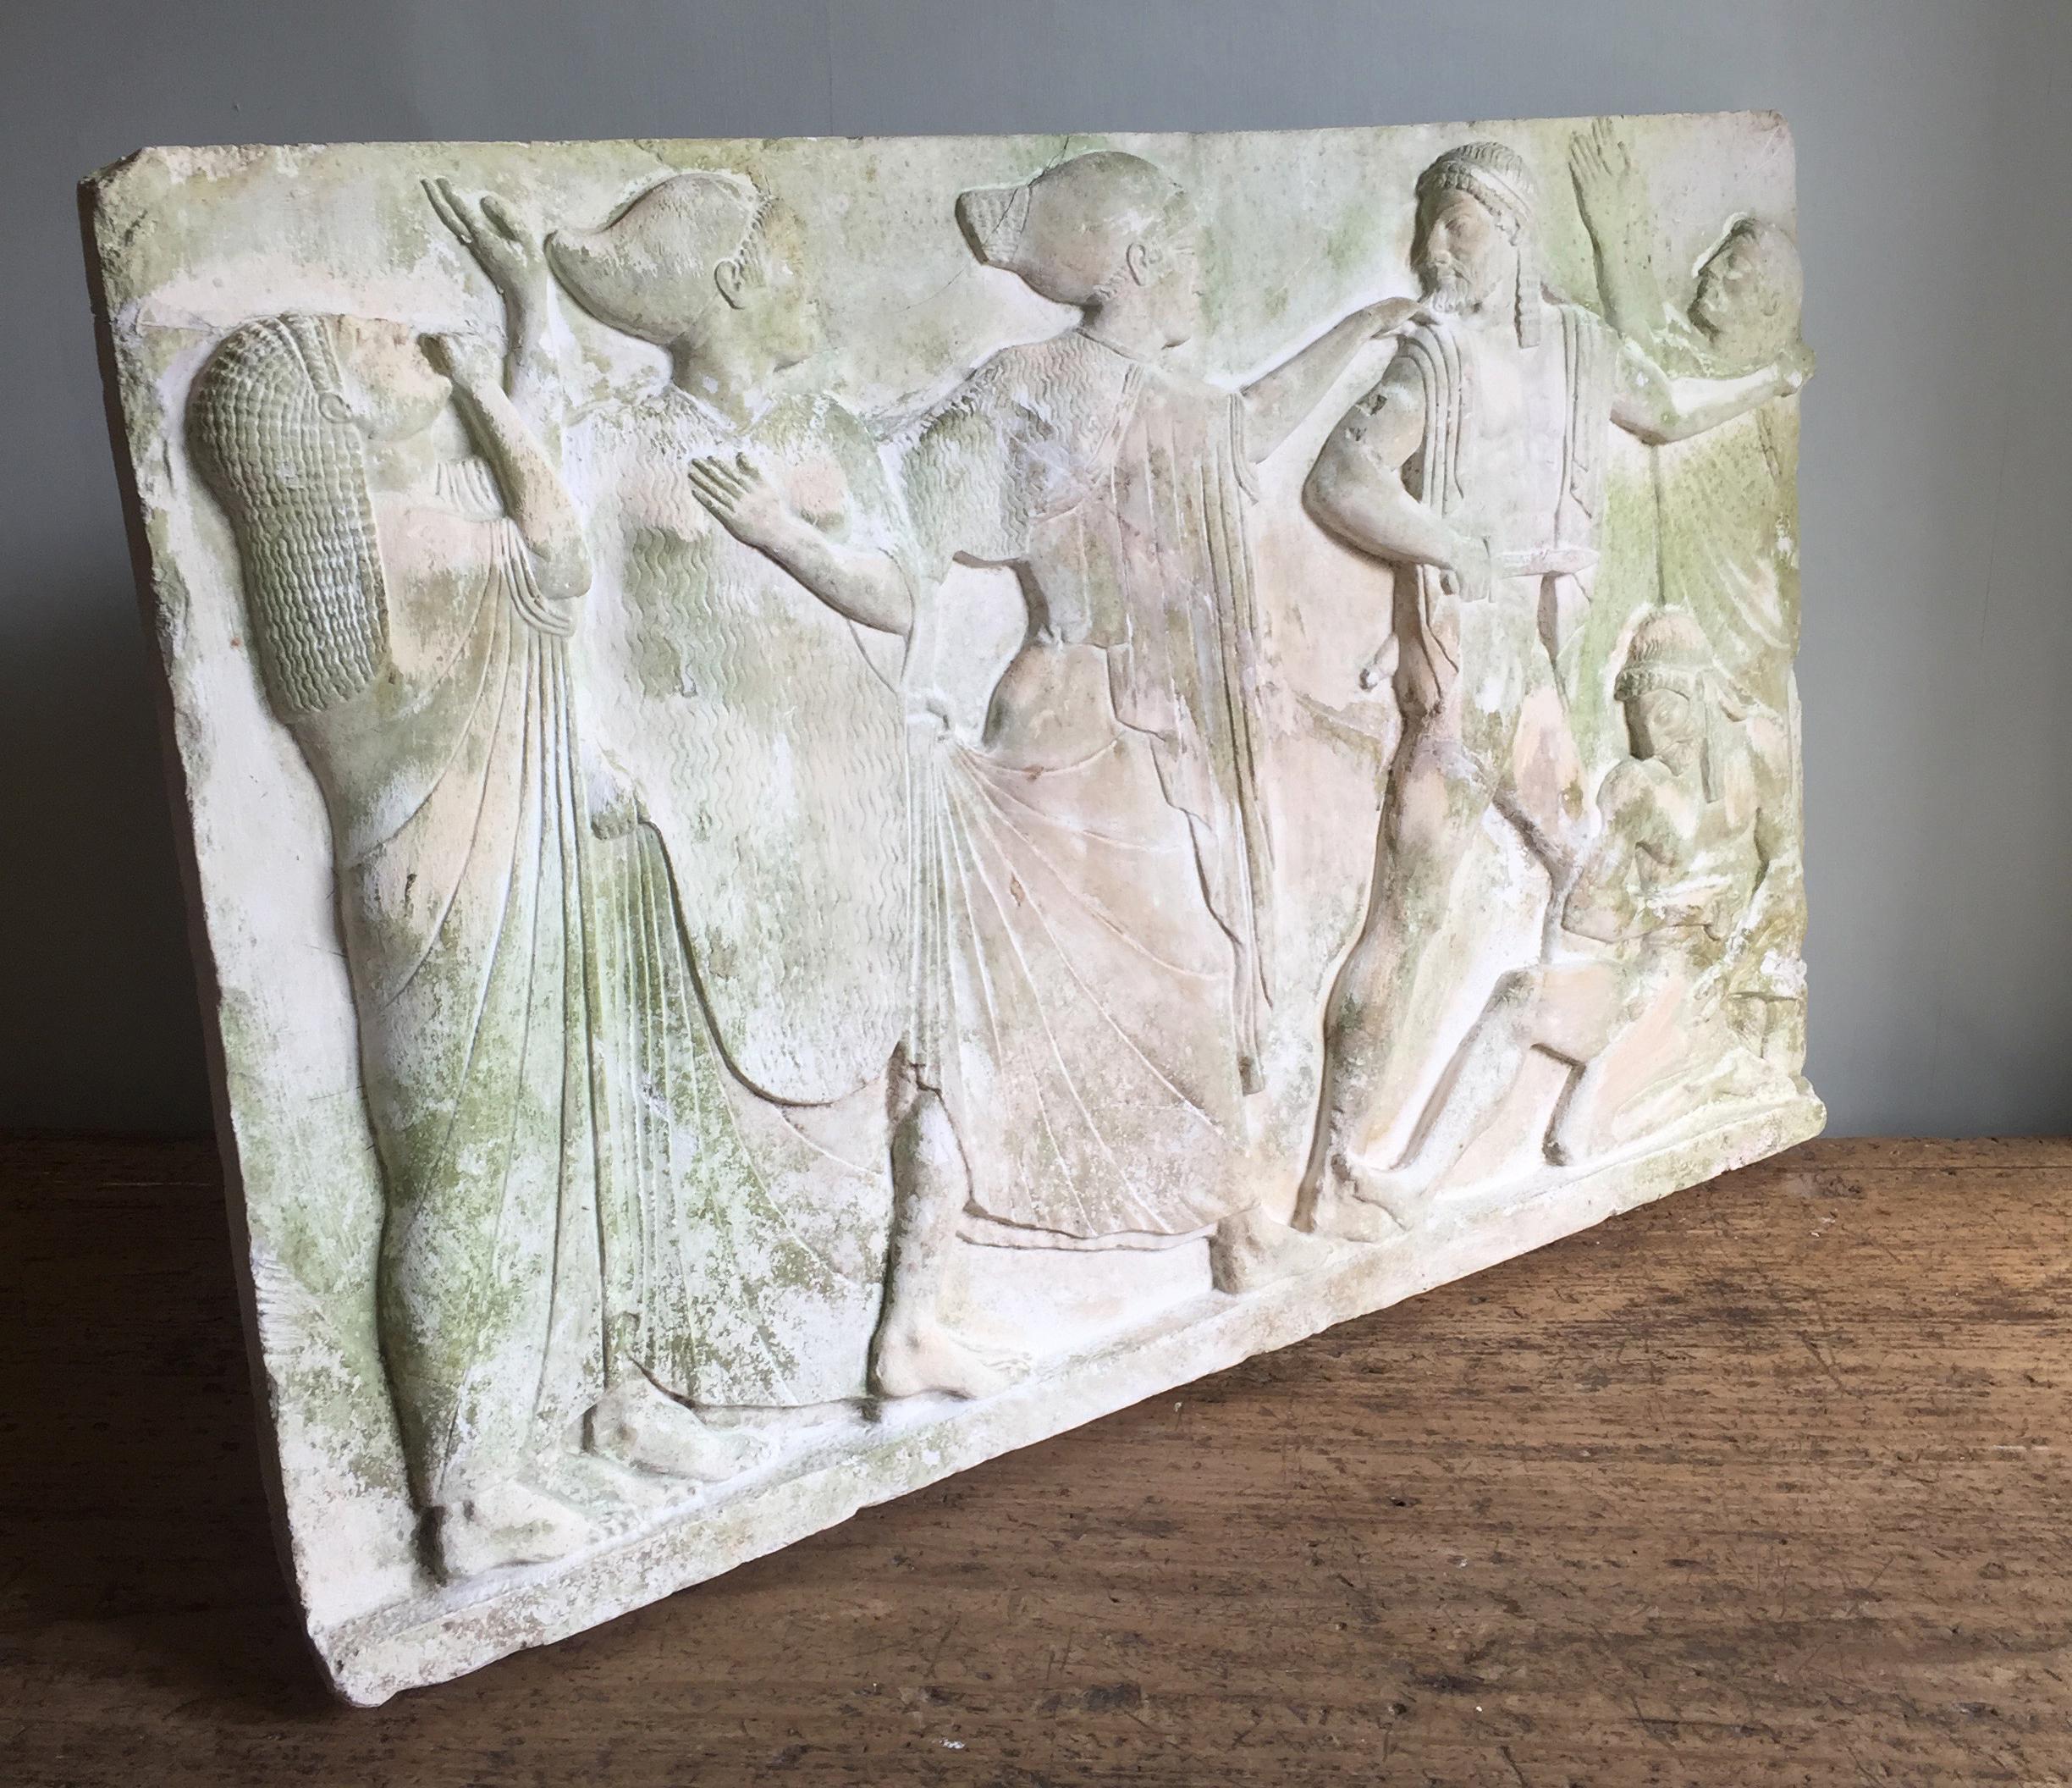 Classical Roman 20th Century 'Death of Aigistho' Relief in Plaster from Ny Carlsberg Glyptotek